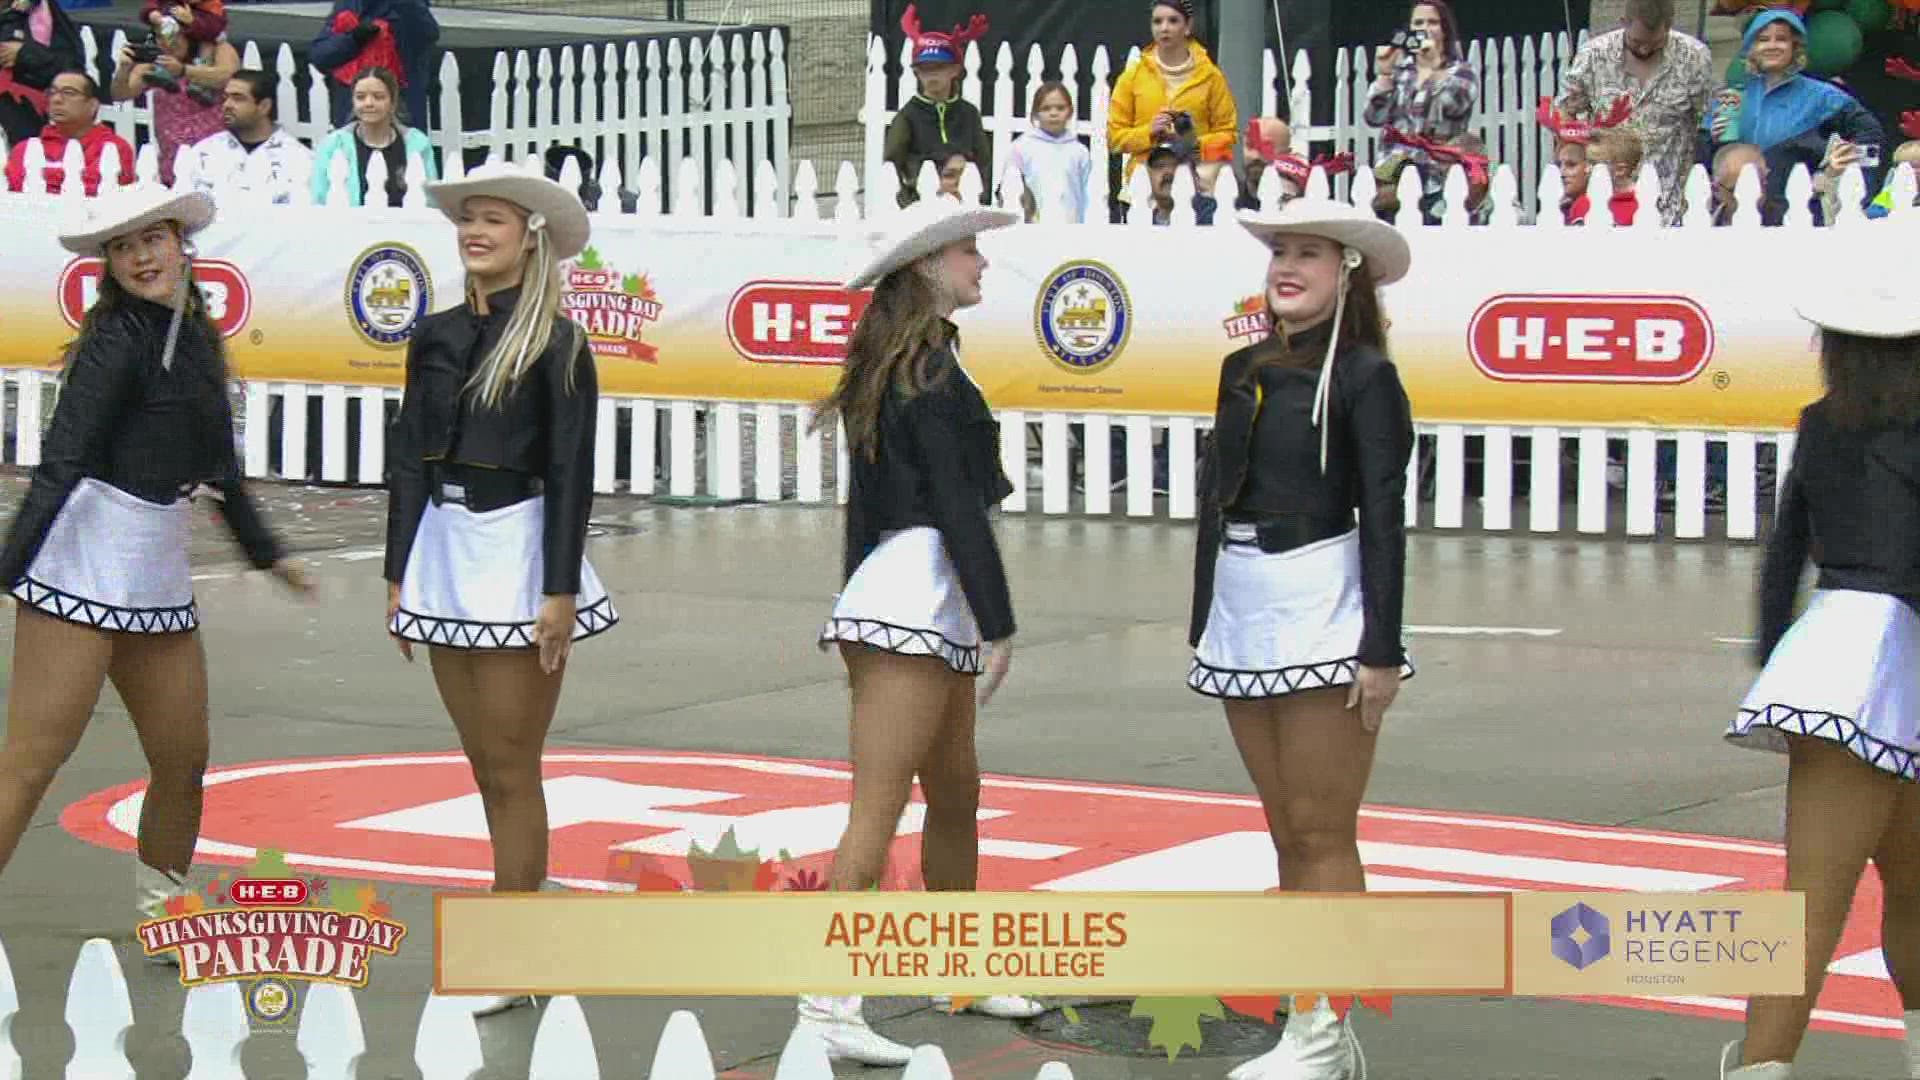 The Apache Belles from Tyler Junior College performed in the 73rd Annual H-E-B Thanksgiving Day Parade Thursday morning.